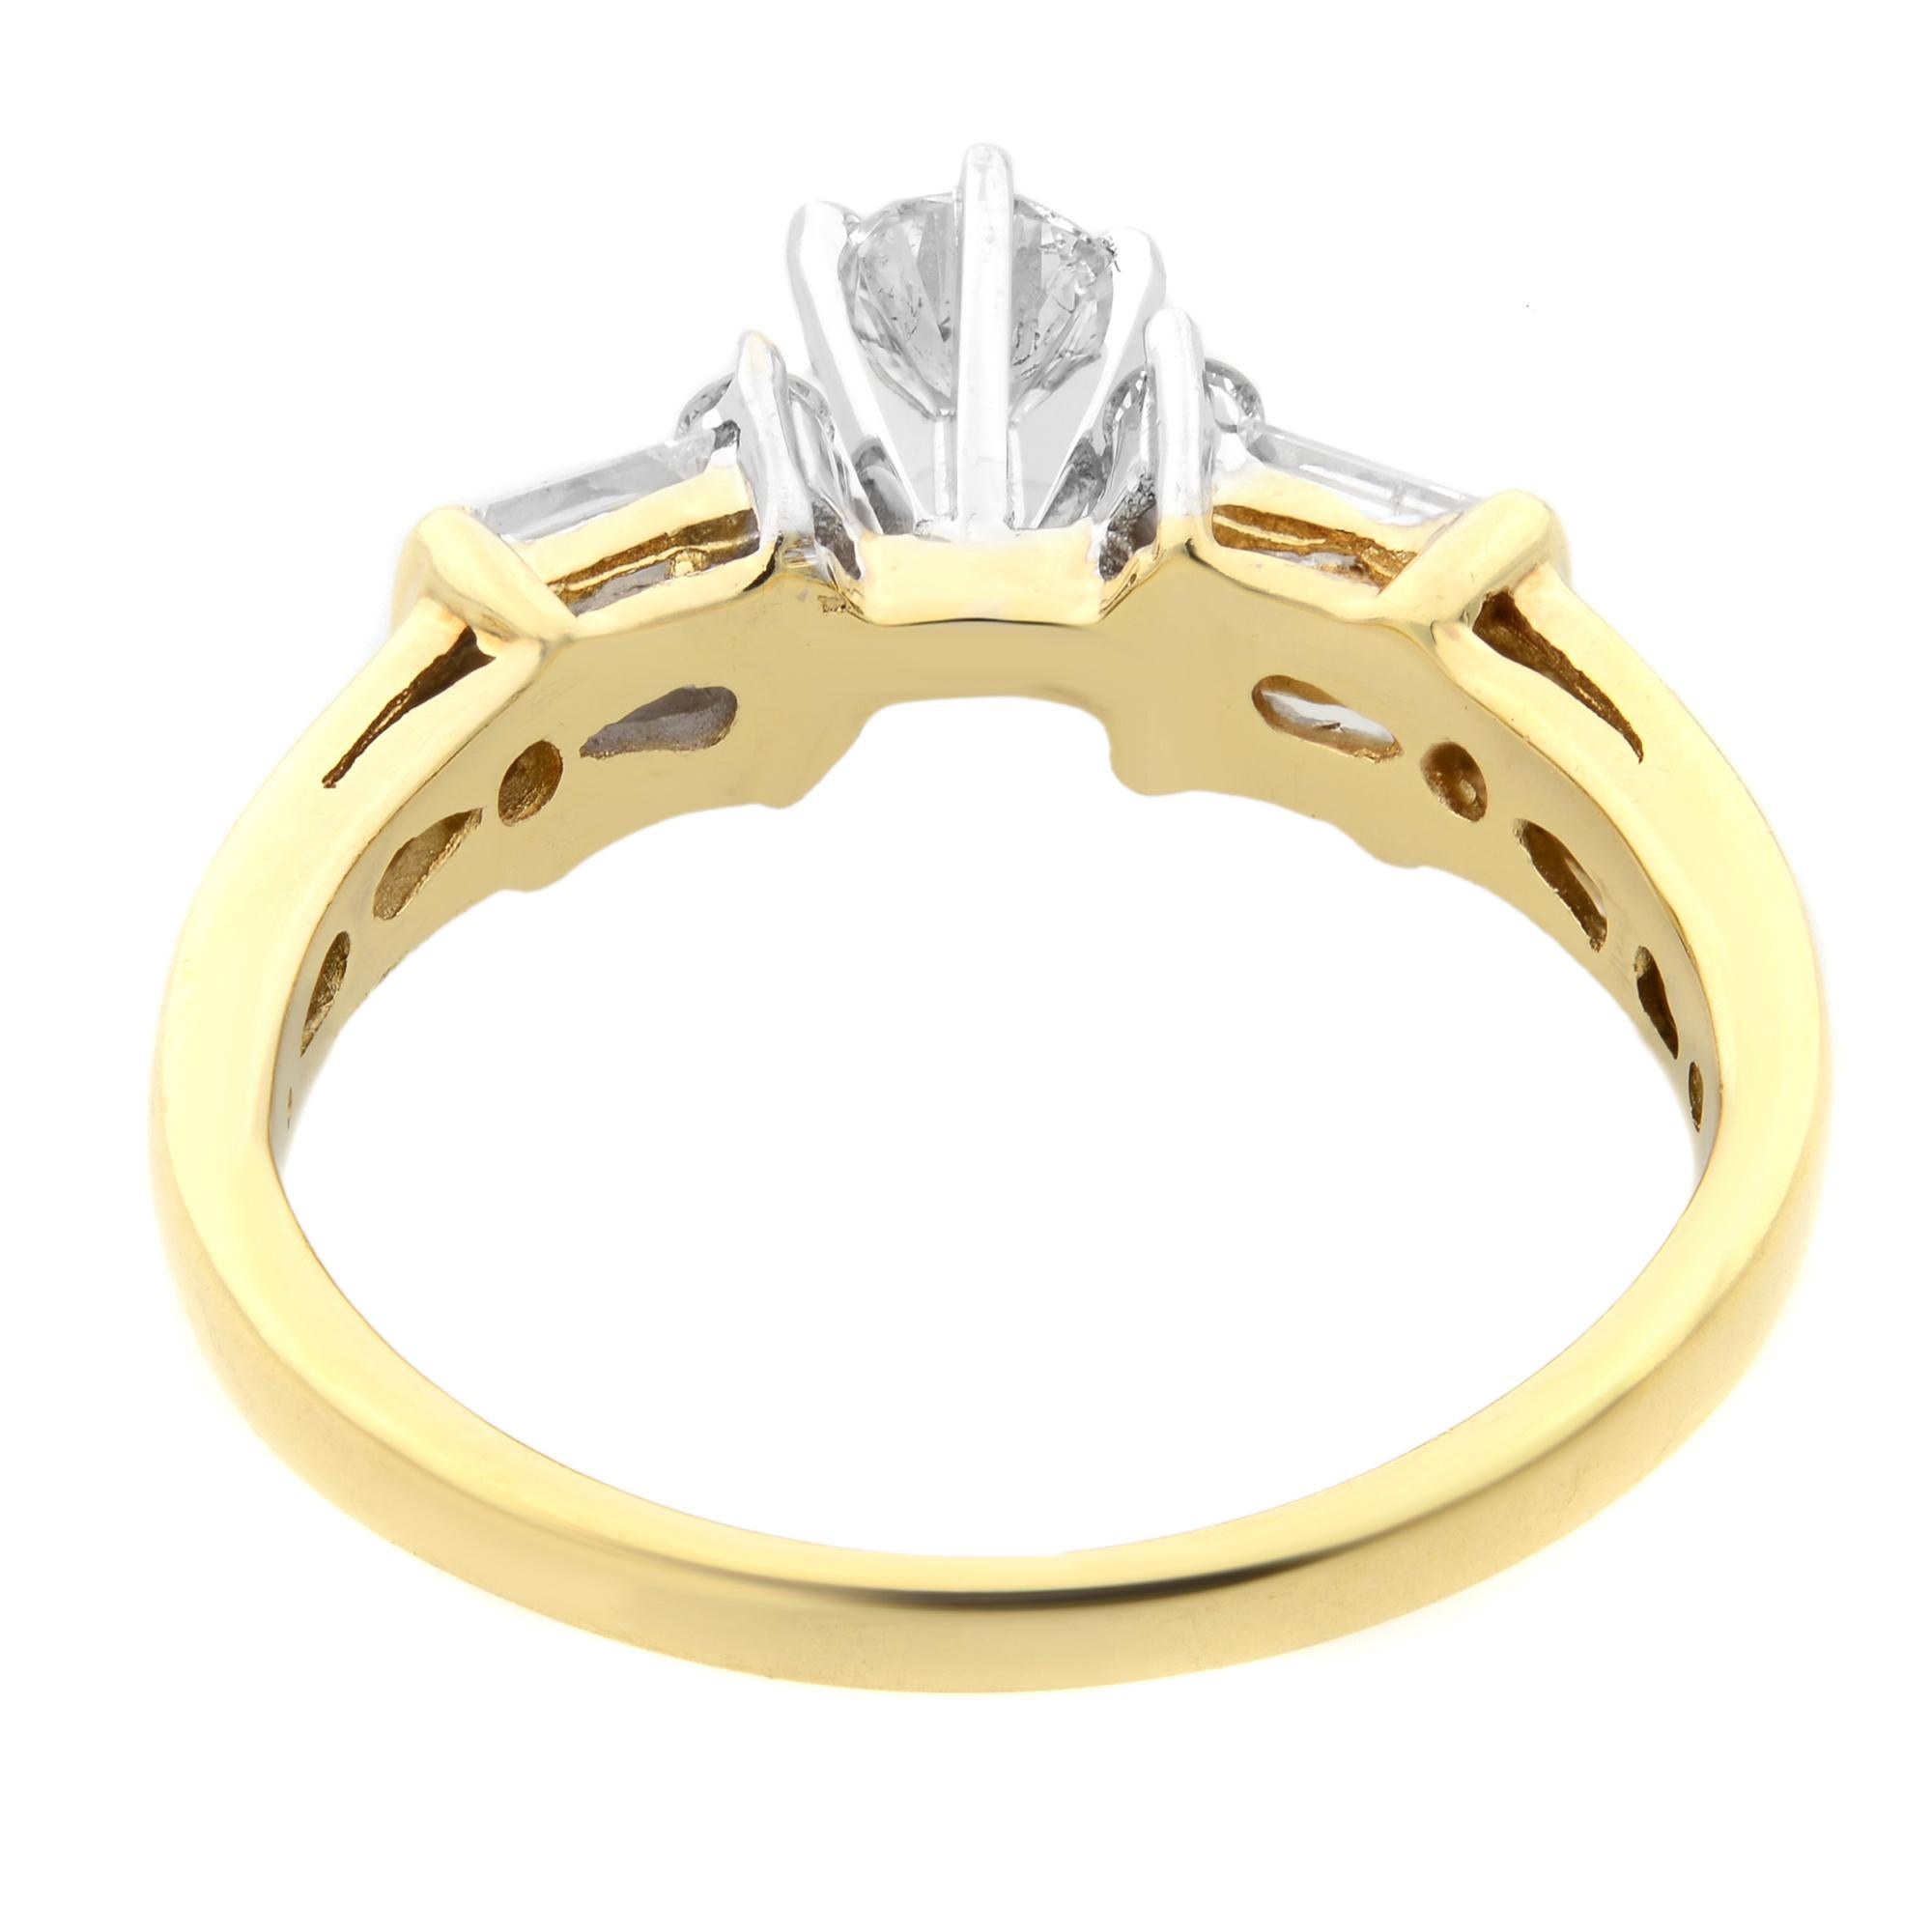 Round Cut 1.00Cttw Round & Baguette Cut Diamond Engagement Ring 14K Yellow Gold Size 6.5 For Sale